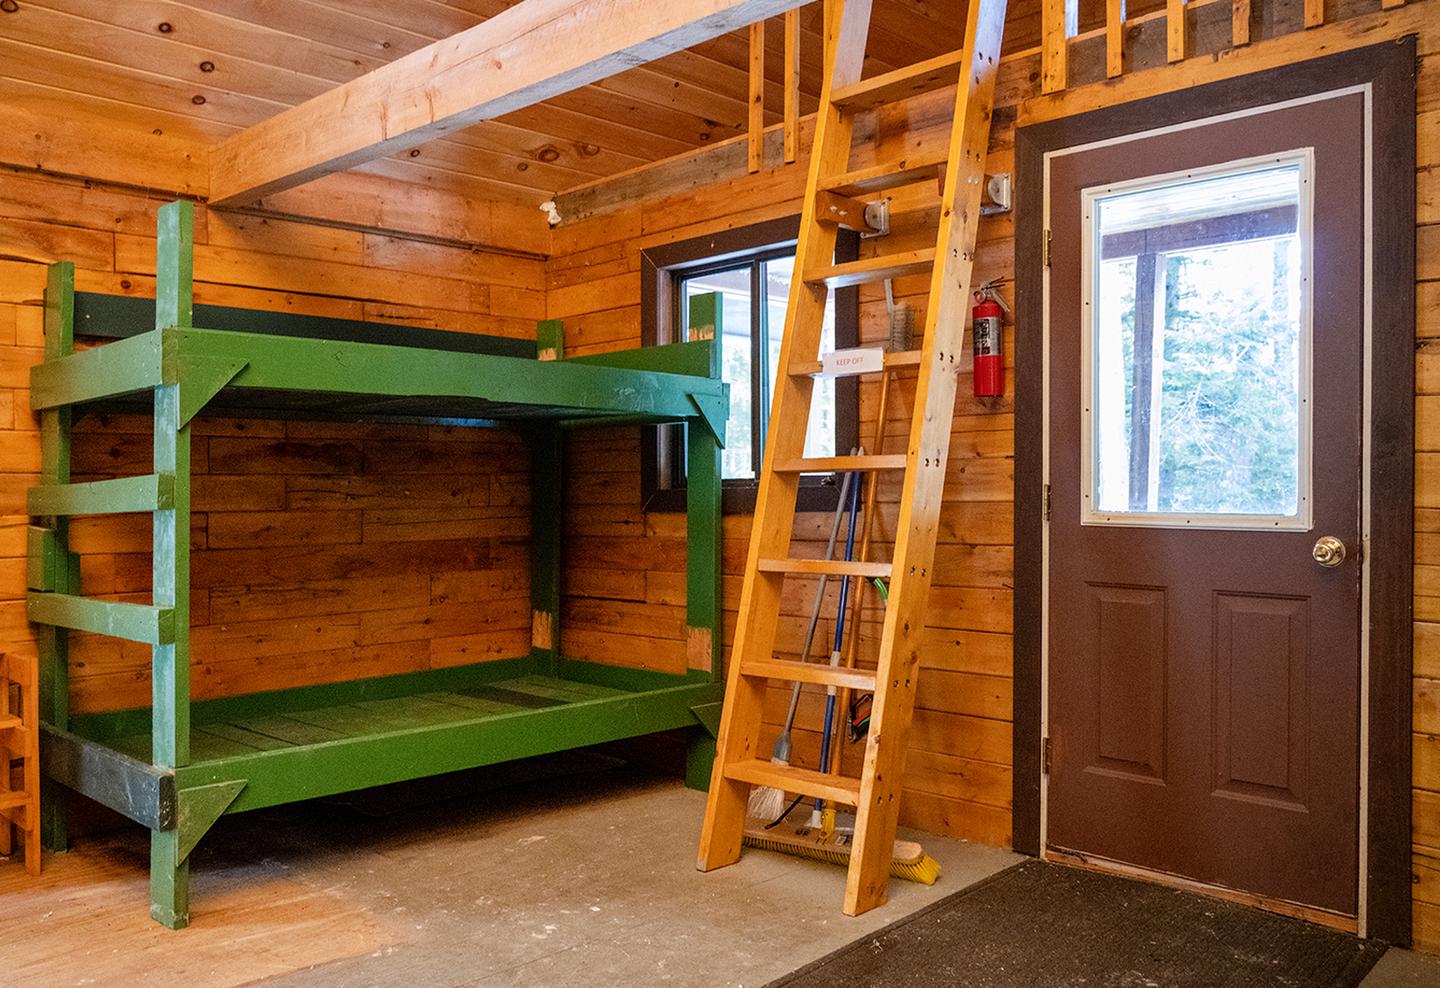 A wooden green bunk next to a wooden ladder (not for visitor use). A door with a window lets in light next to it.There are 4 bare wooden bunks inside. Remember to bring your own sleeping and camping gear!